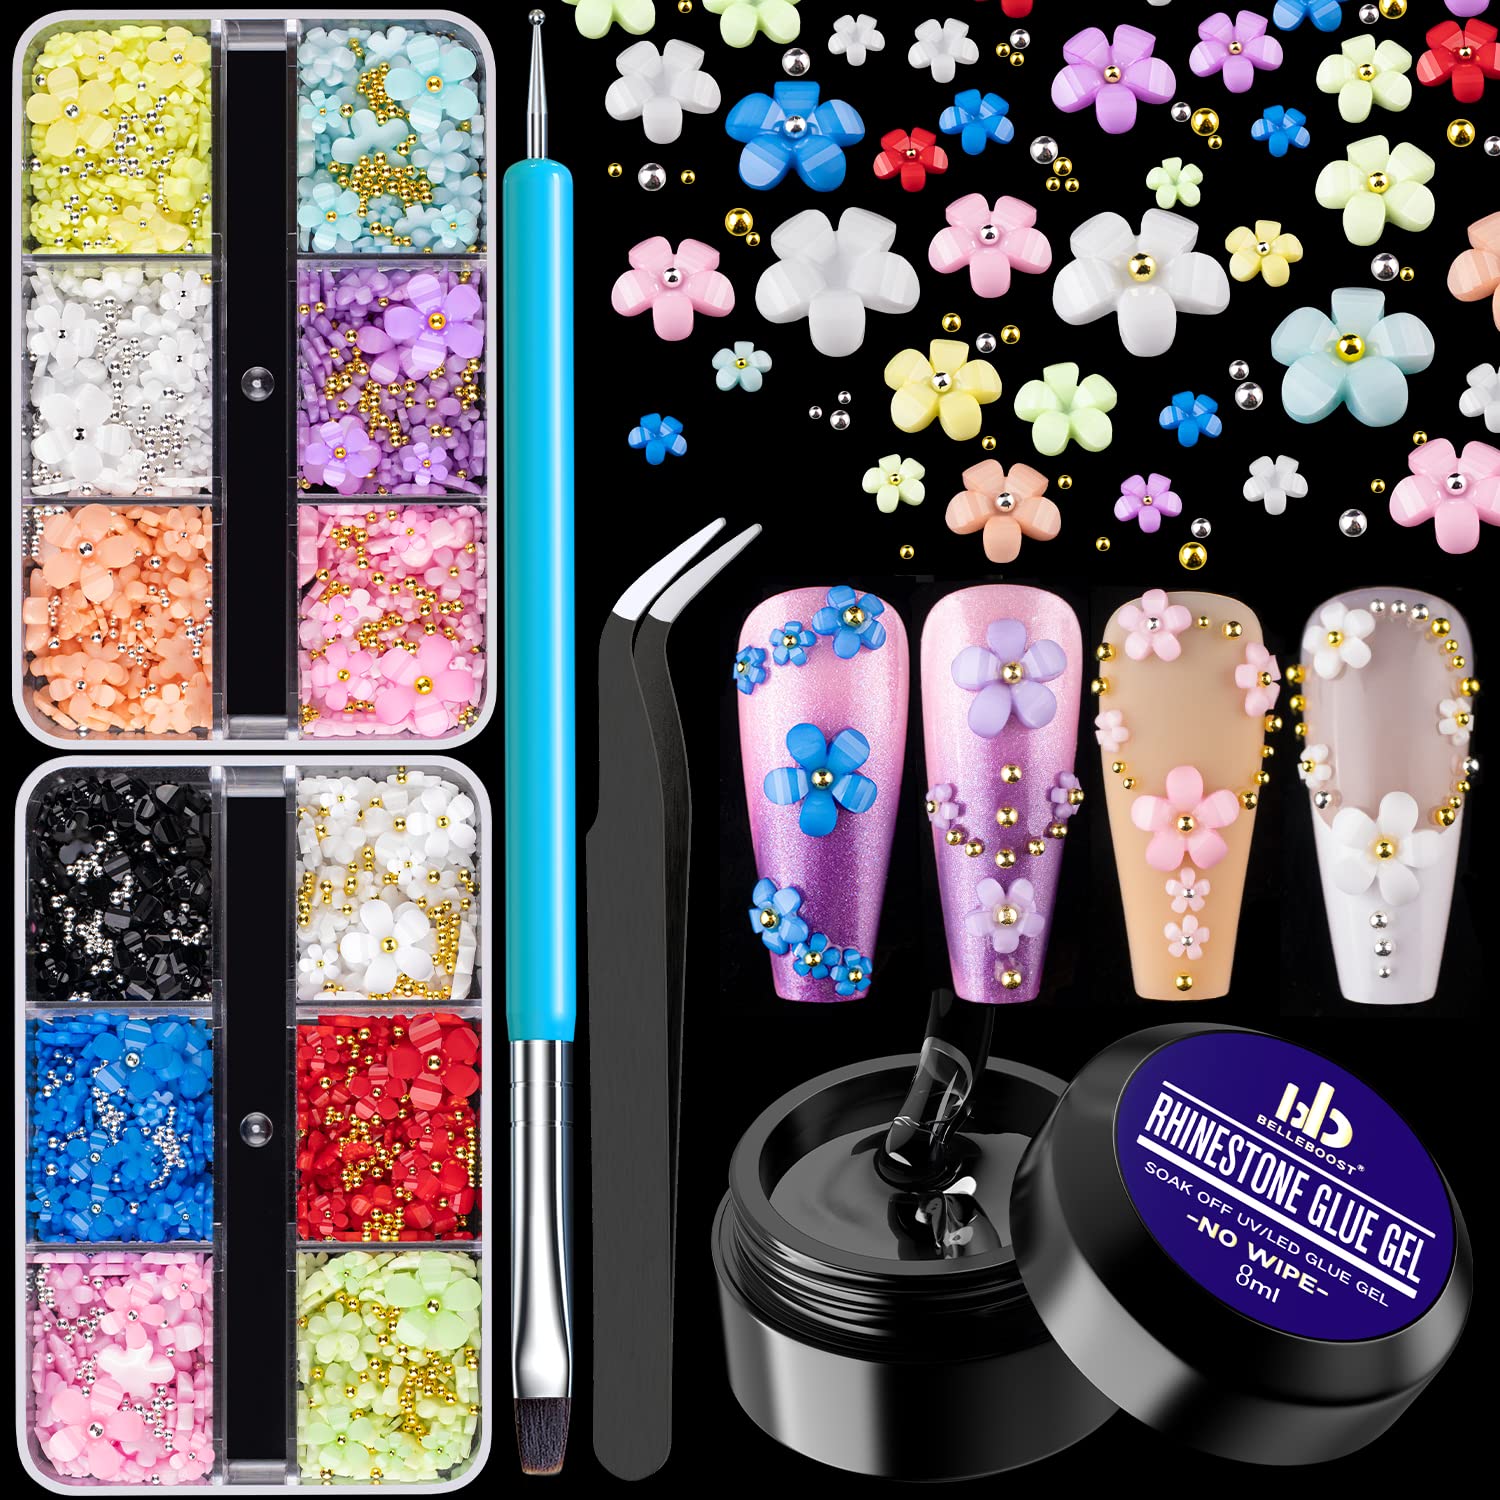 LoveOurHome 4 Boxes 3D Flower Nail Charms Colorful Blossom Studs Nail  Supplies with Gold Silver Pearl Caviar Beads Manicure Decorations for Gel